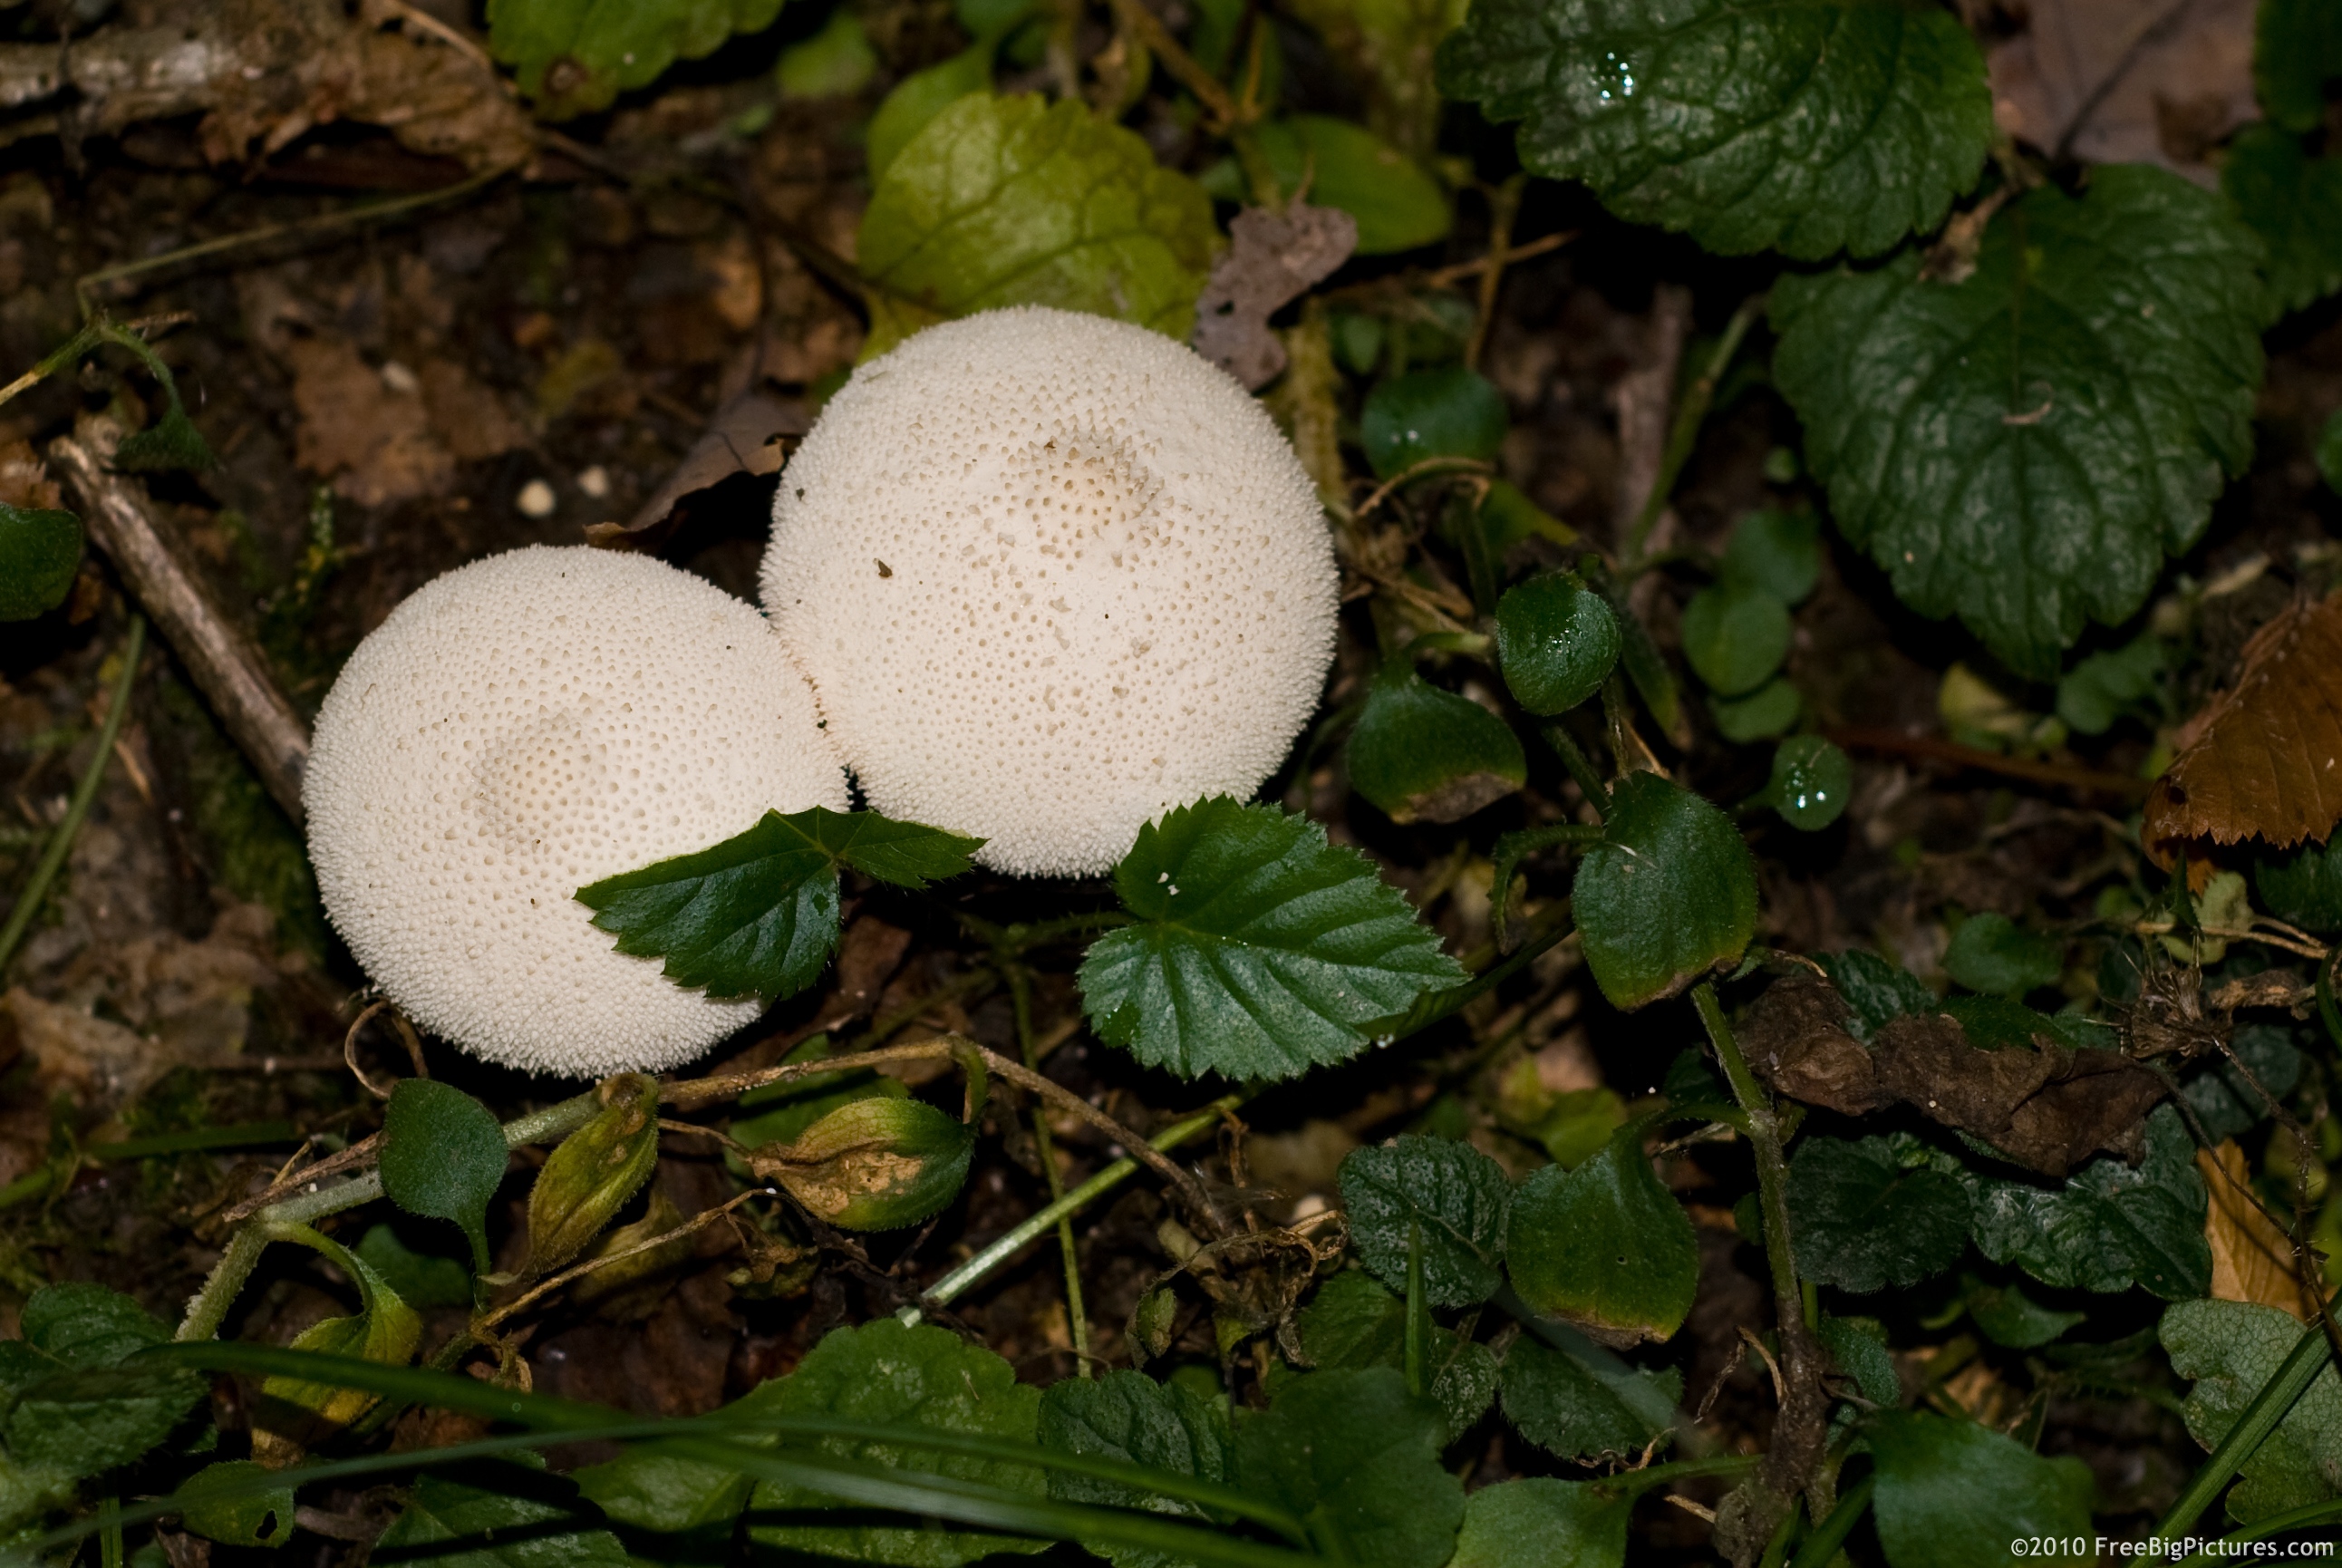 Puffball - a small mushroom that is white when is young, becoming then brown